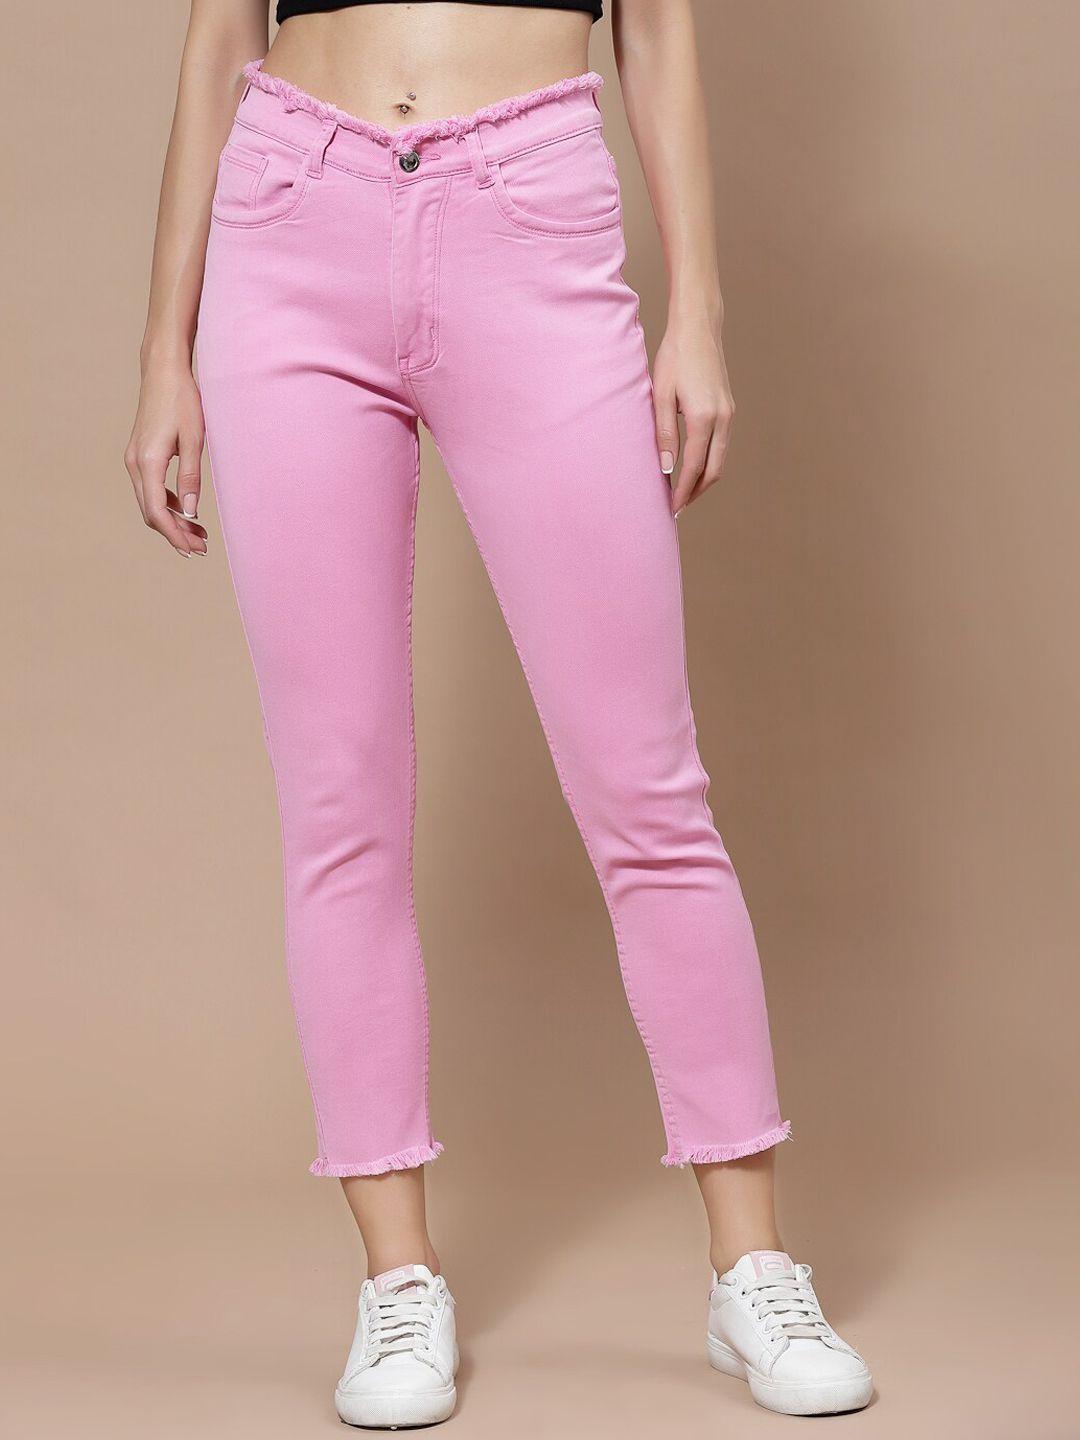 kassually women pink skinny fit stretchable jeans